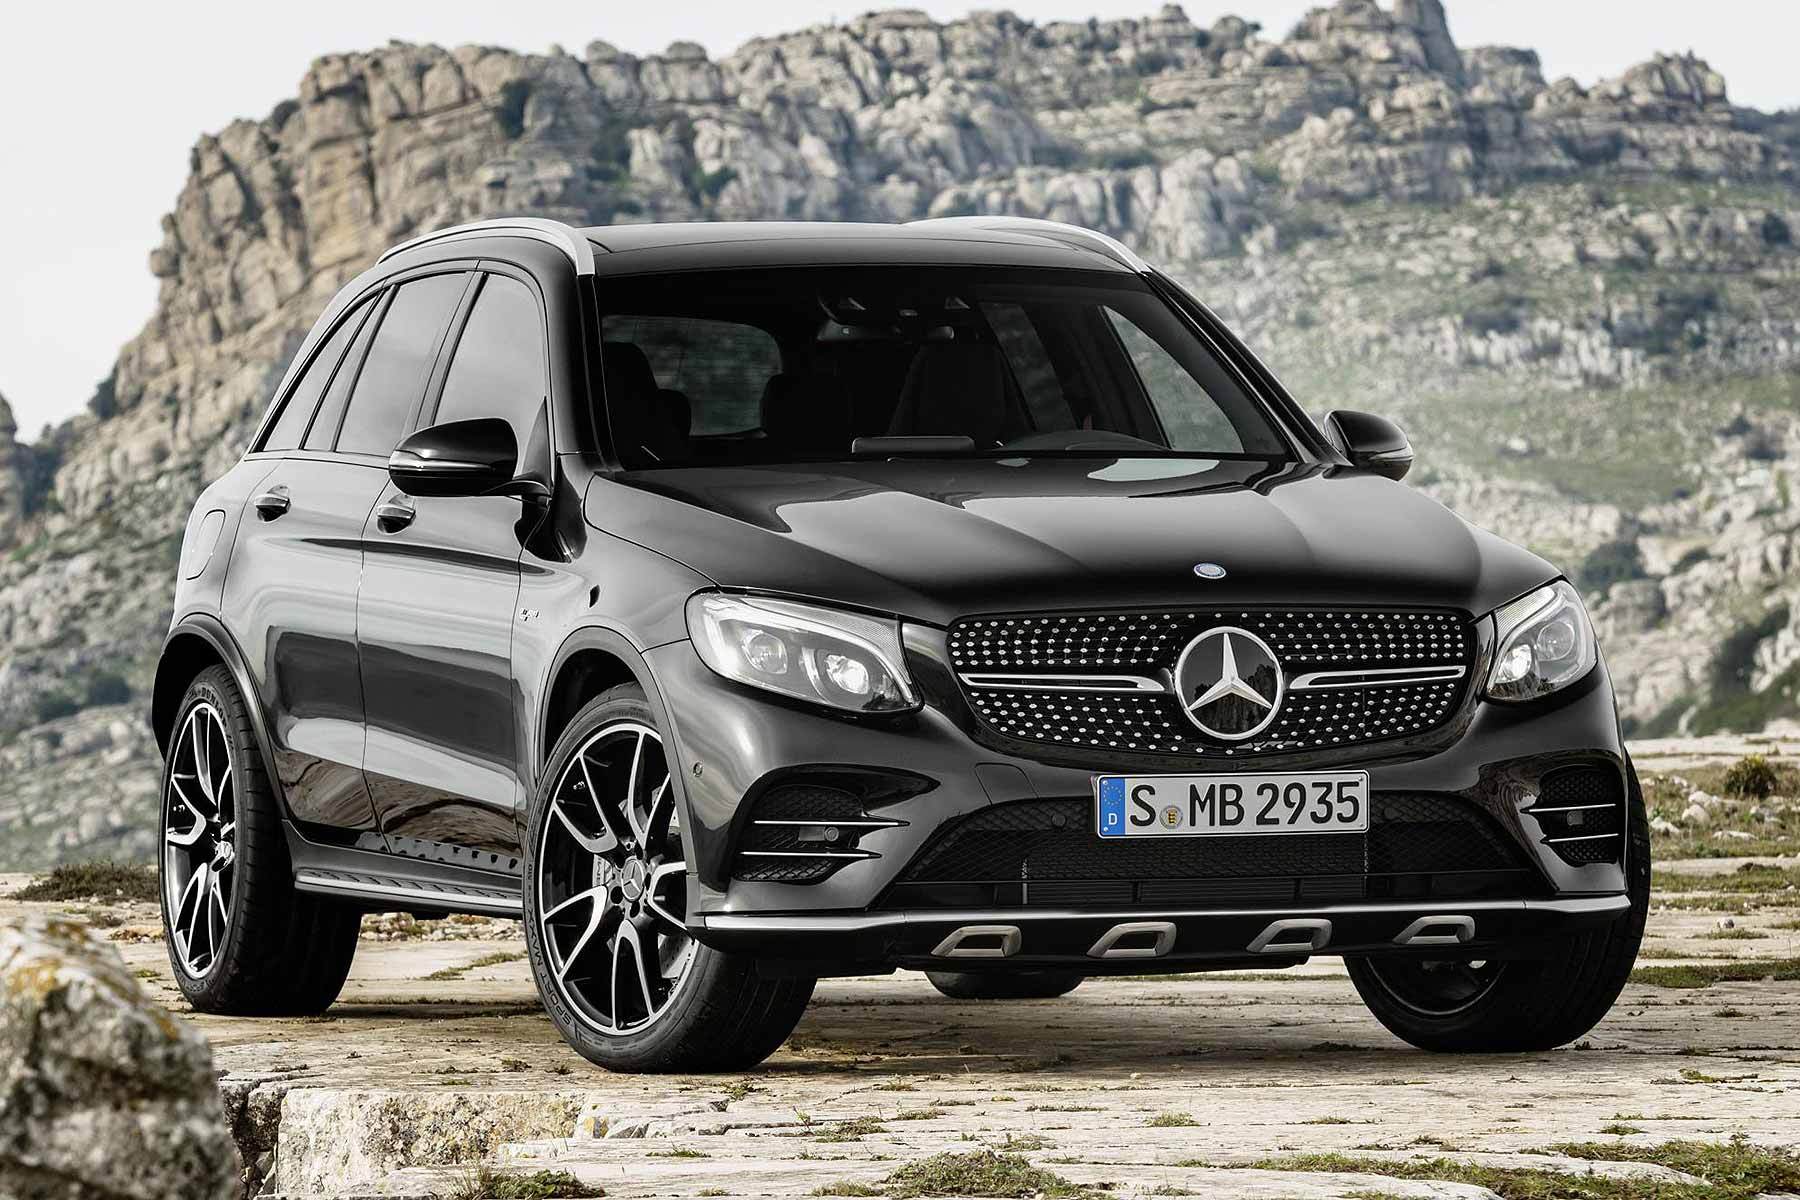 Mercedes Benz GLC 43 AMG has been revealed